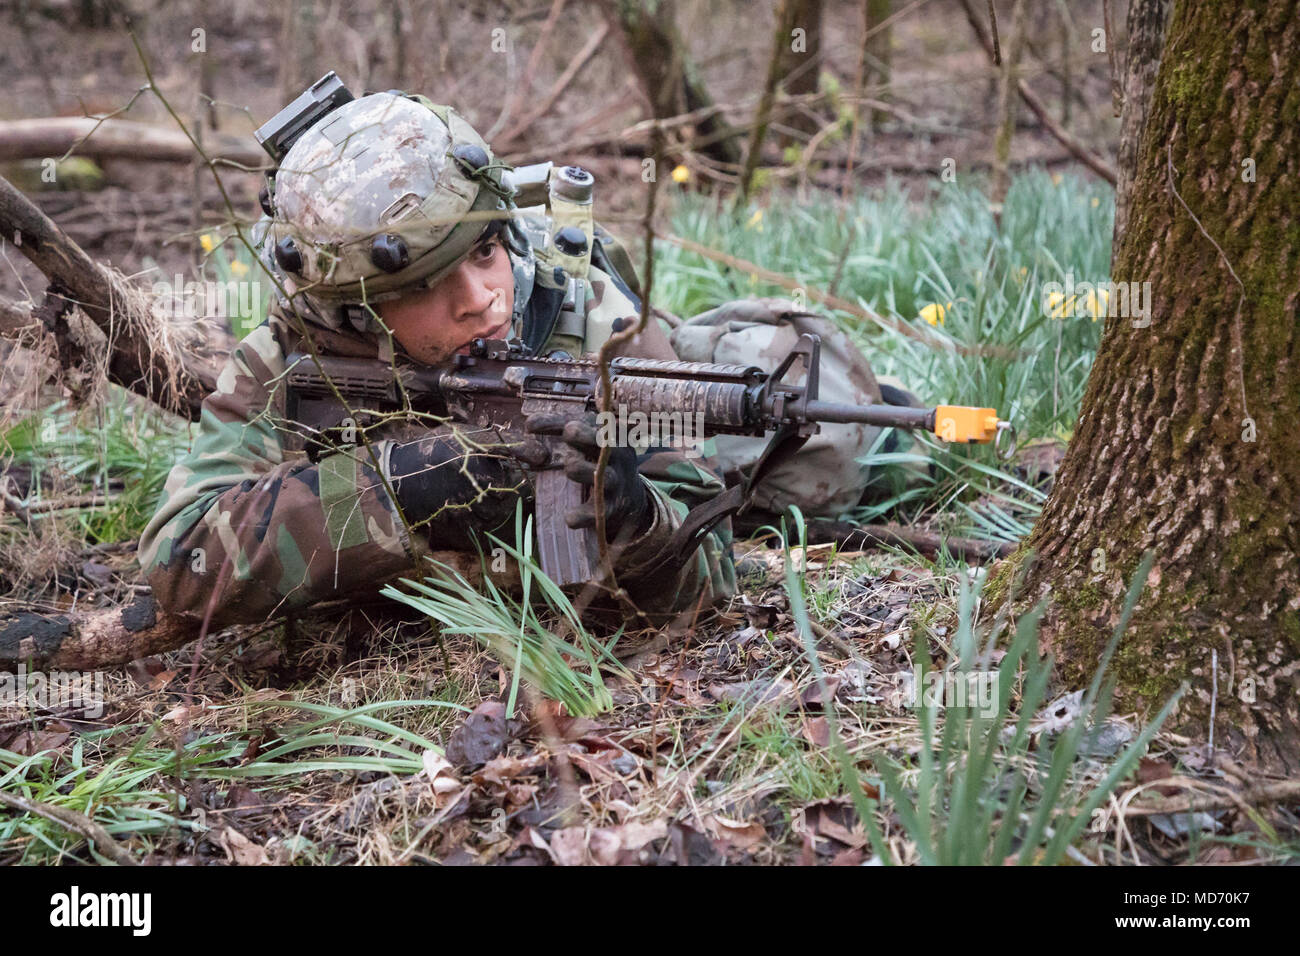 U.S. Army Reserve Sgt. Rogelio Salgado, of the 382nd Combat Sustainment Support Battalion, provides security during the Combat Support Training Exercise (CSTX) at Fort Knox, Kentucky, March 25, 2018. CSTX 2018 ensures Army Reserve units are trained and ready to deploy on short notice and bring capable, combat ready, and lethal firepower in support of the Army and our joint partners anywhere in the world. (U.S. Army photo by Spc. Jesse Coggins) Stock Photo